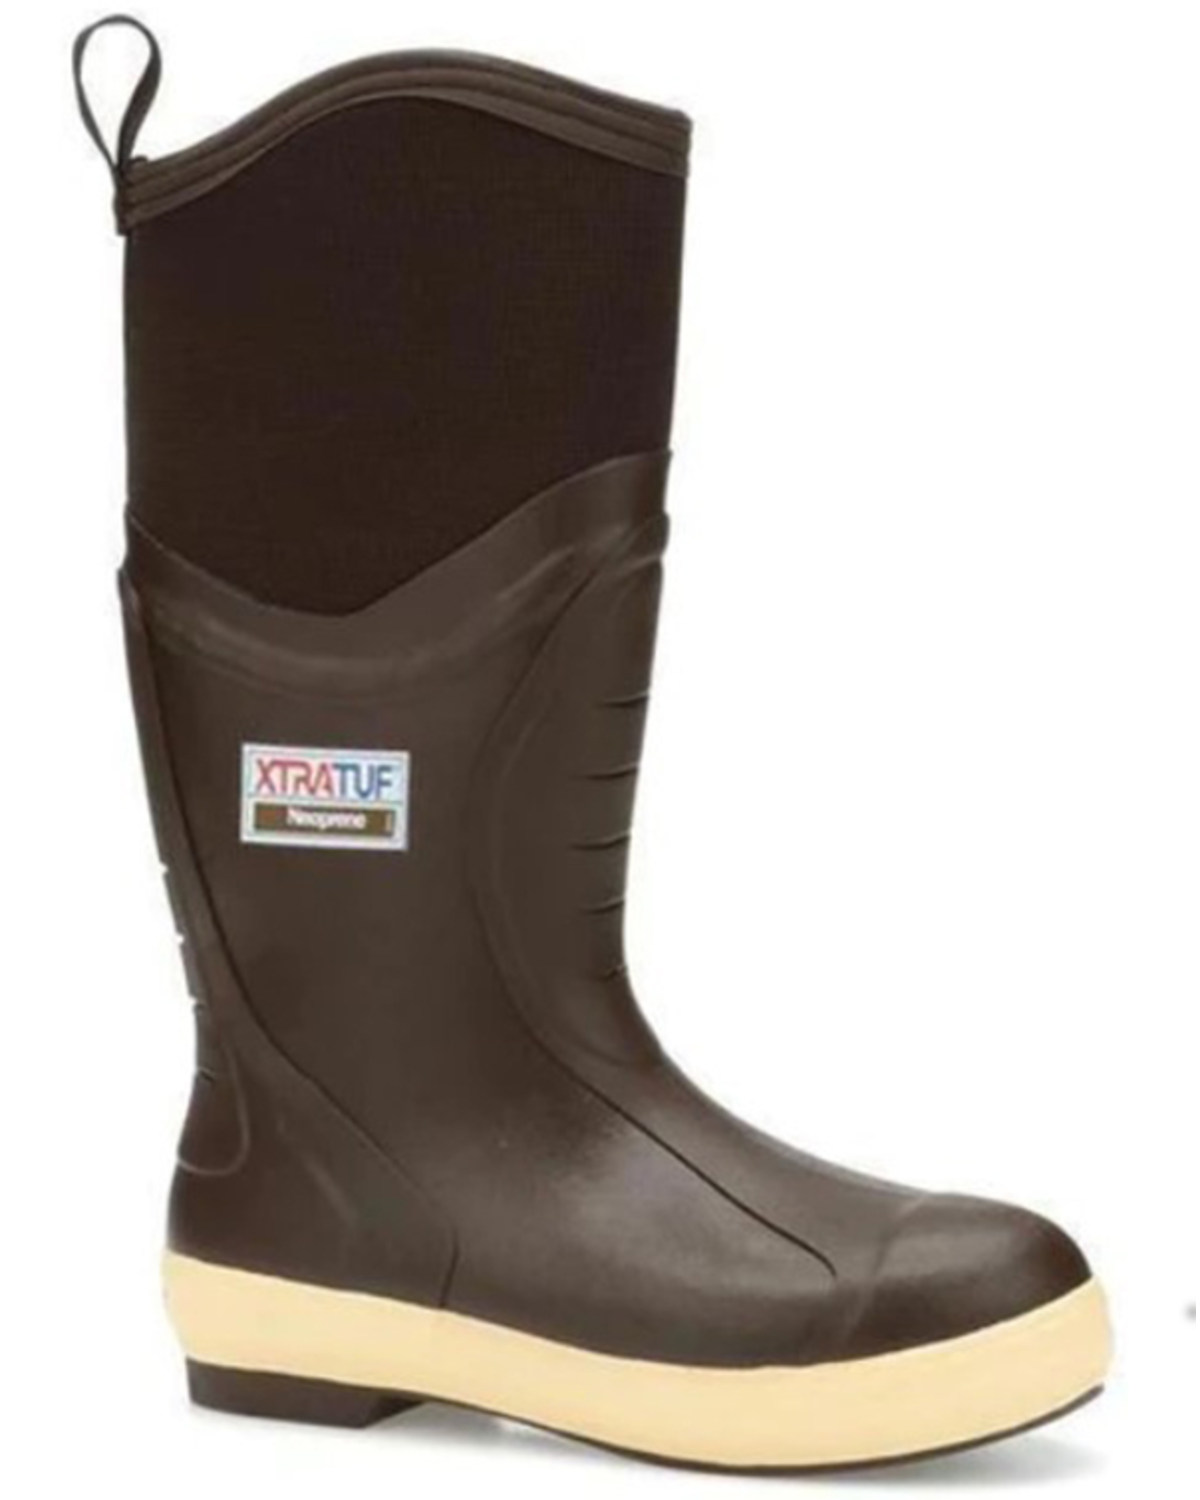 Xtratuf Men's 15" Insulated Elite Legacy Boots - Round Toe